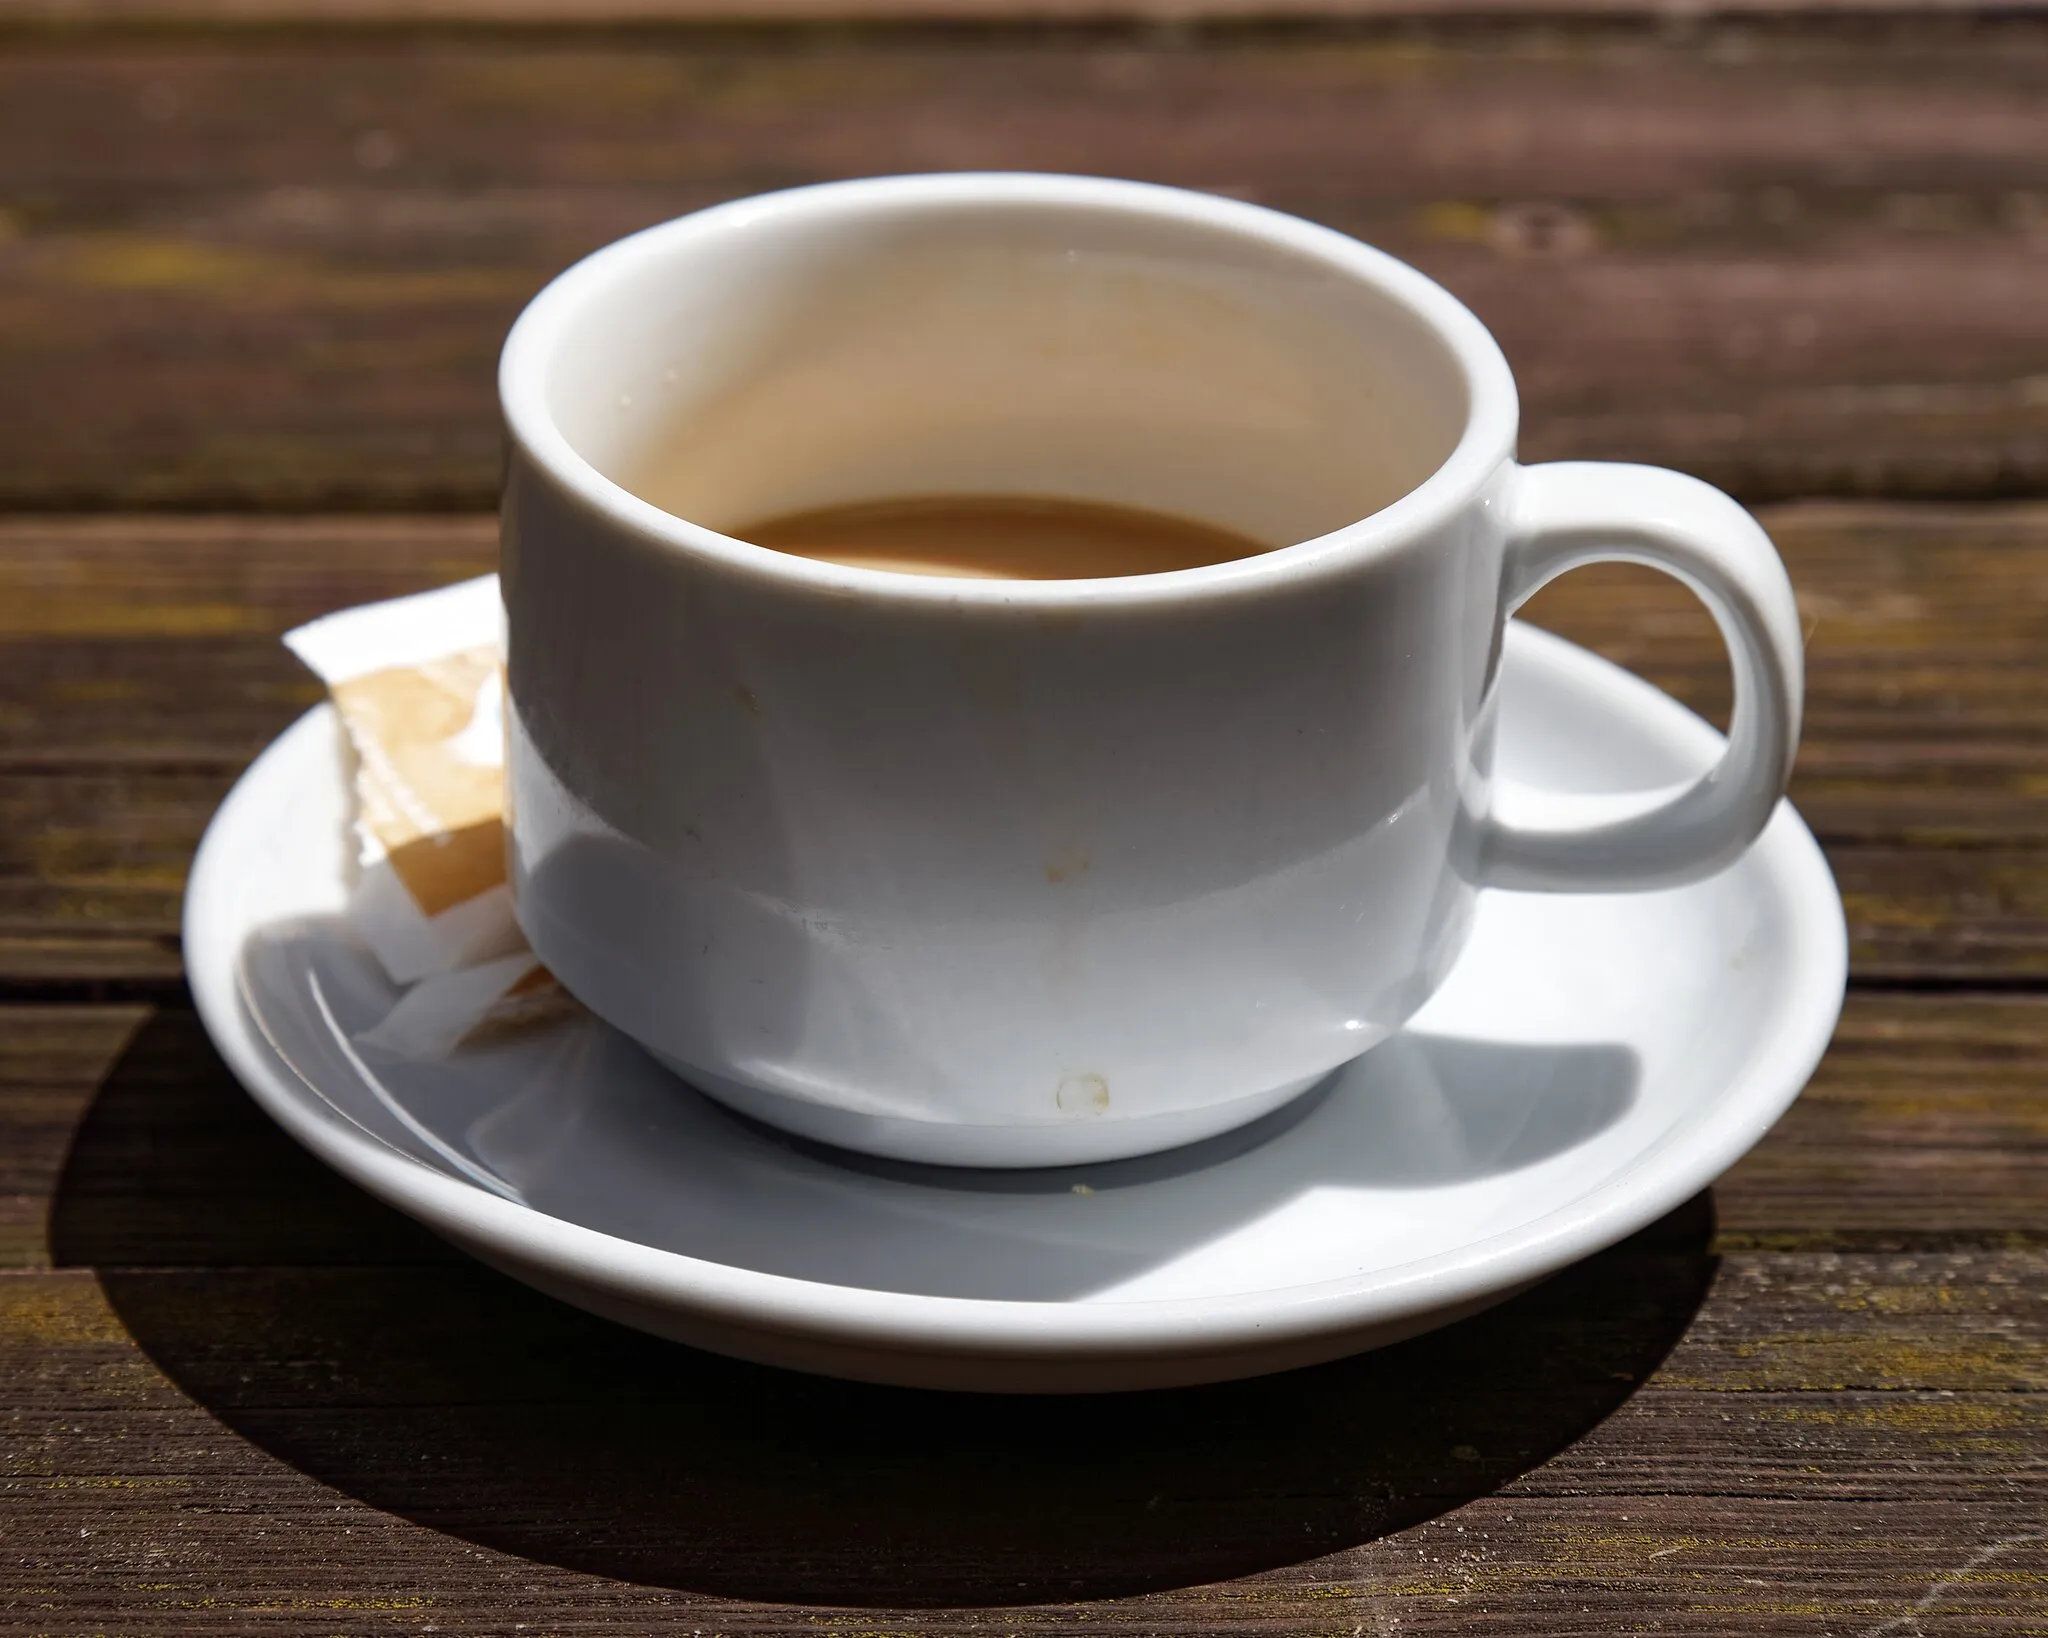 Photo showing: A half drunk cup of coffee in The Crown public house garden at Newgate Street Village (name of road), at Newgate Street, in the civil parish of Hatfield, and the Borough of Welwyn Hatfield, Hertfordshire, England. Camera: Camera: Canon EOS 6D with Canon EF 24-105mm F4L IS USM lens. Software: file lens-corrected and optimized with DxO OpticsPro 10 Elite and Viewpoint 2, and further optimized with Adobe Photoshop CS2.